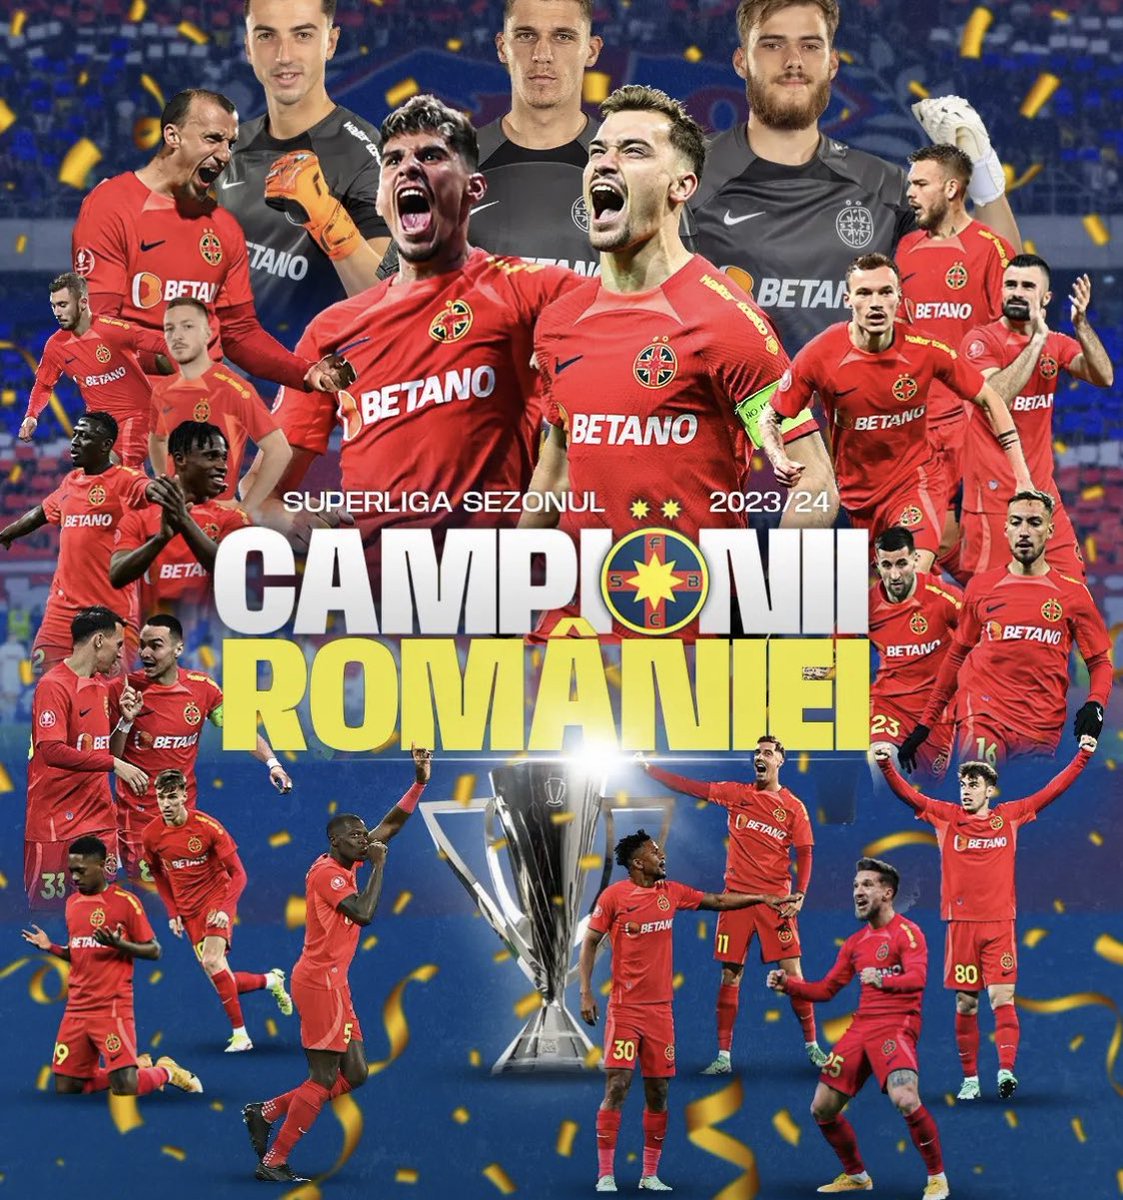 YES!! YES!! AFTER NINE YEARS, WE ARE CHAMPIONS of ROMANIA🇷🇴🏆❗️🎉🎶 #WeAreSteaua❤️💙 #27TITLES